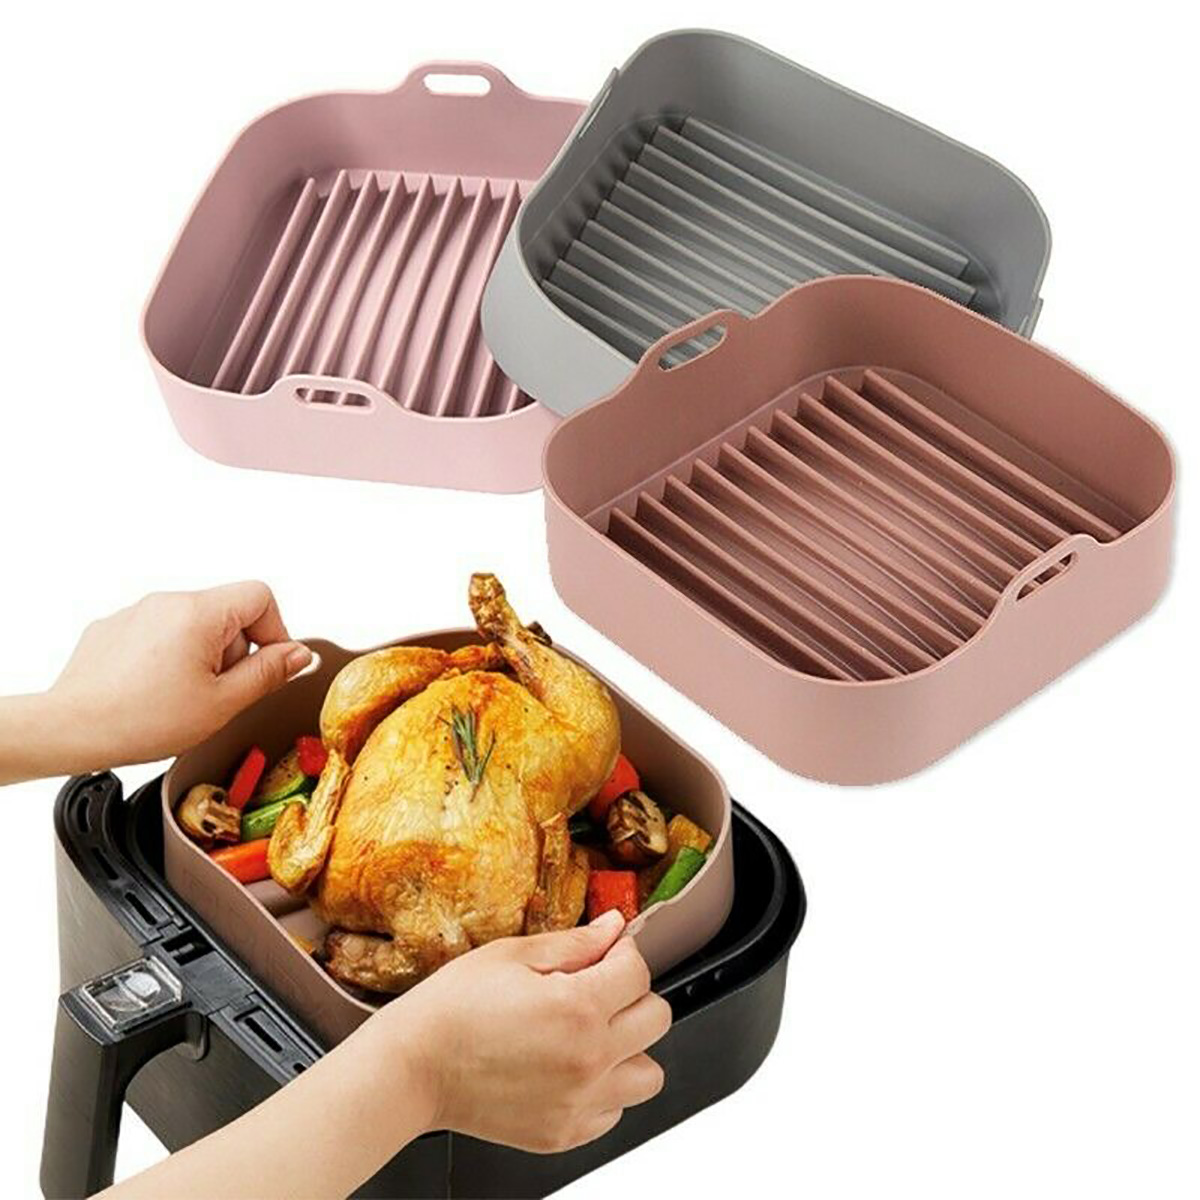 Multifunctional-Silicone-Baking-Tray-High-Temperature-Resistant-Non-stick-Bread-Fried-Baking-Pan-wit-1864776-4